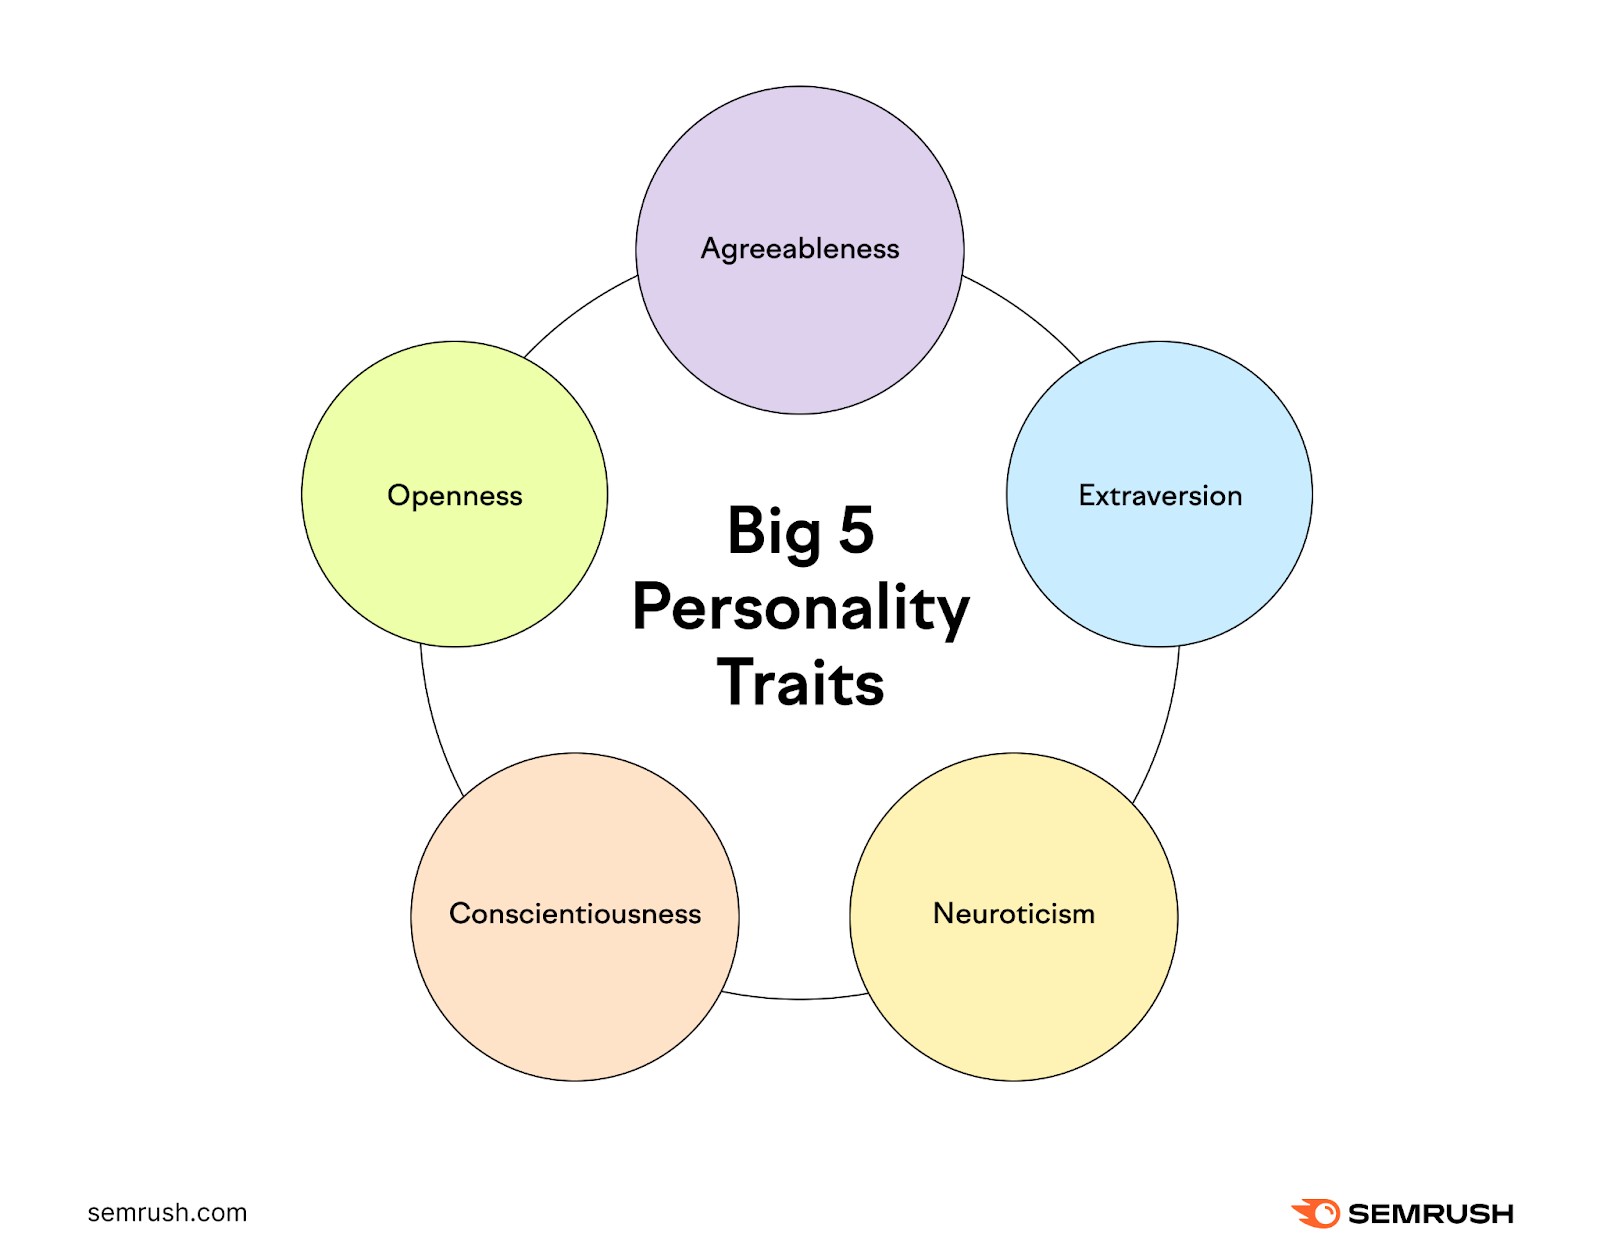 “Big Five” personality traits: openness, conscientiousness, extraversion, agreeableness, and neuroticism